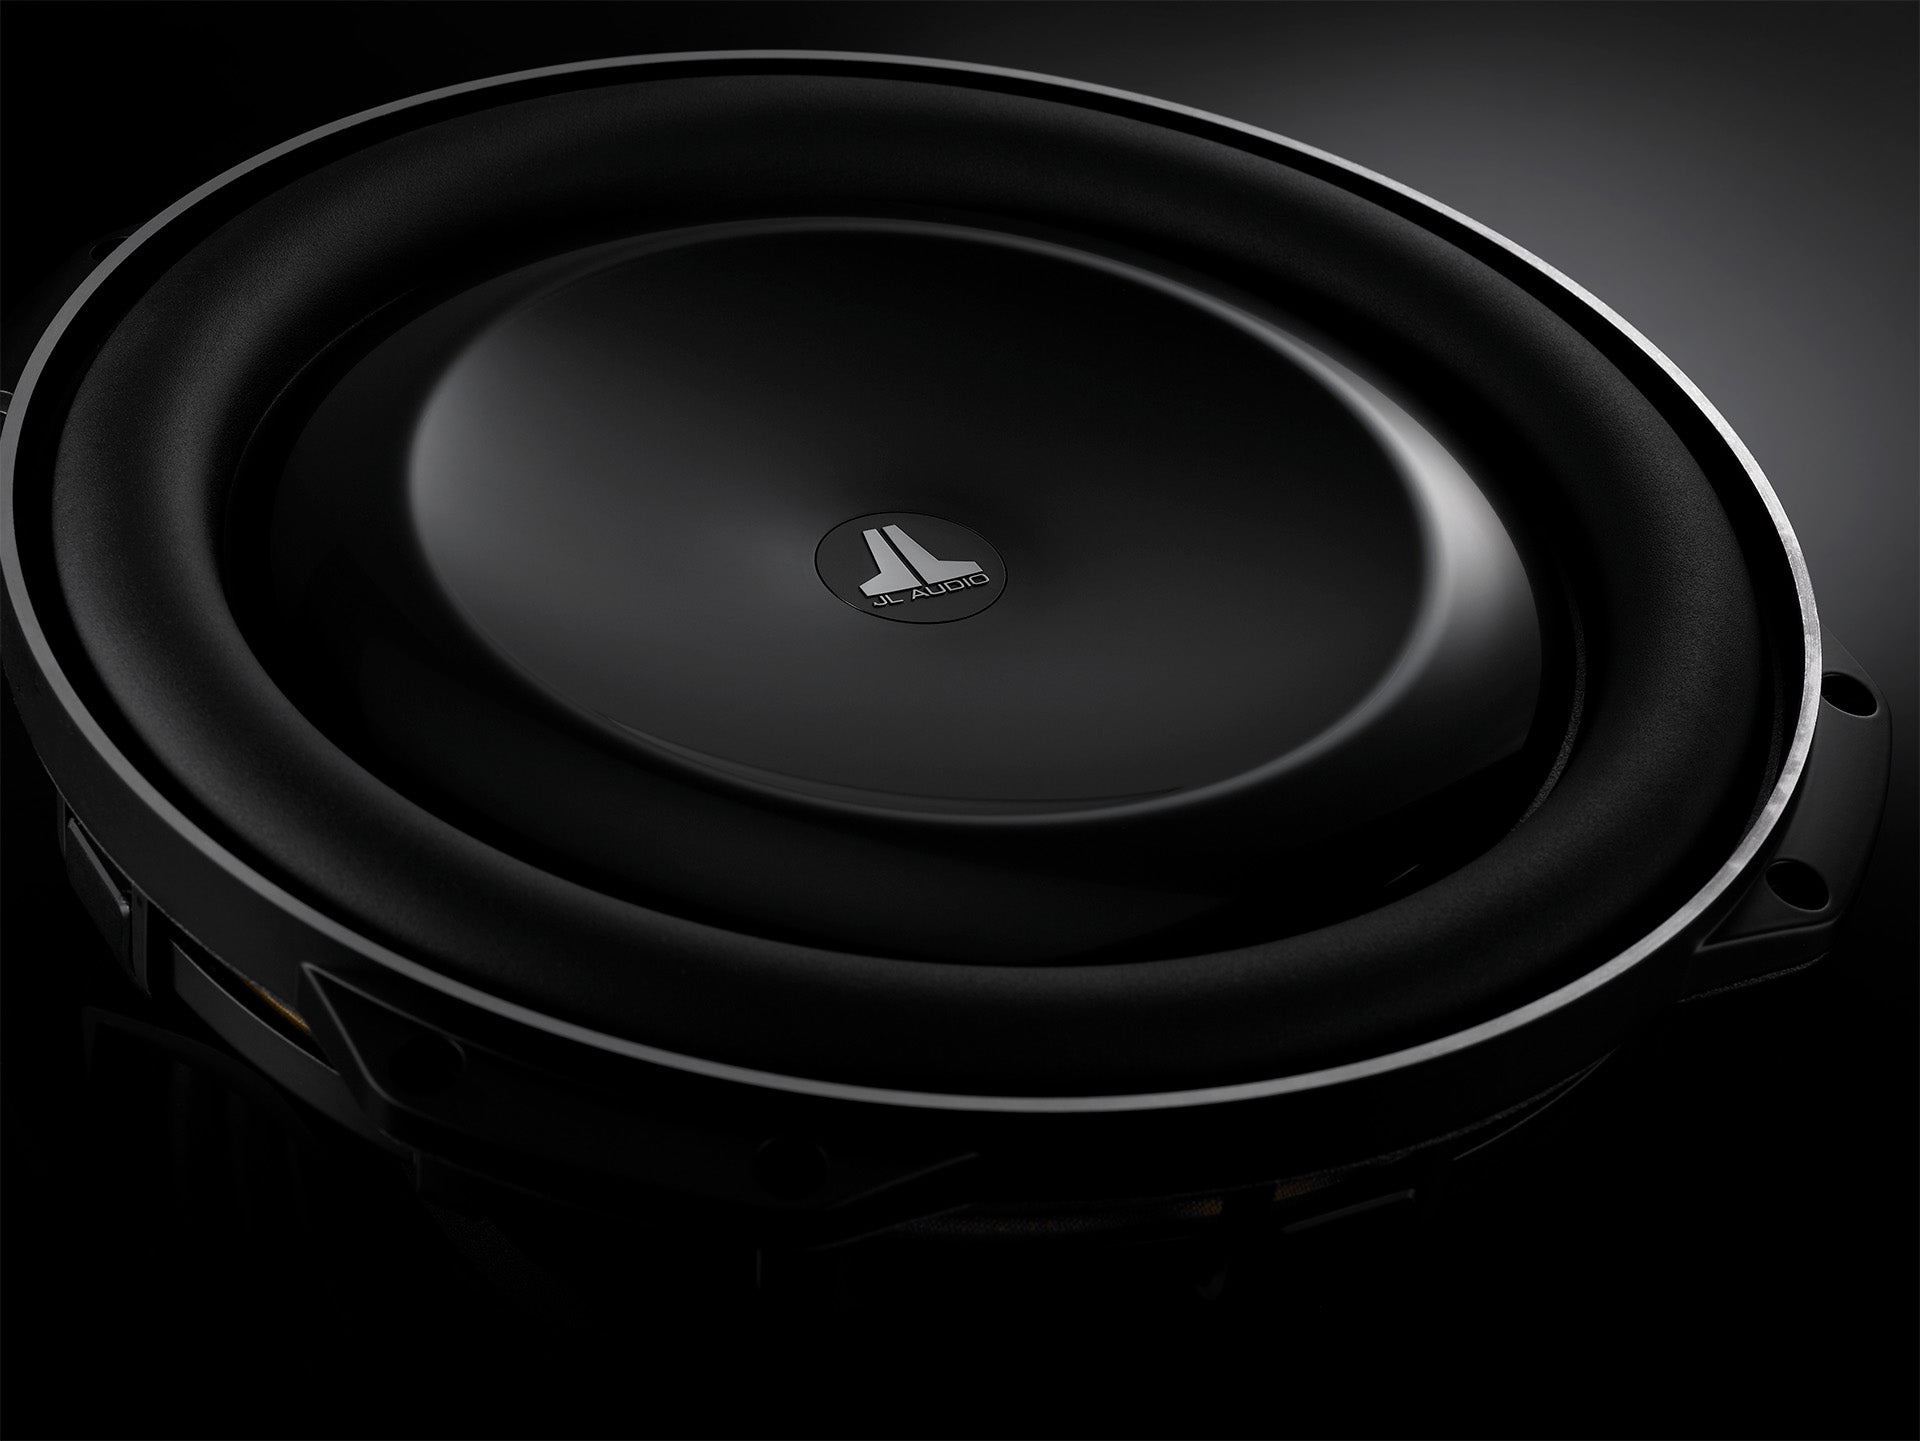 Close-up view of TW5v2 driver used in JL Audio IWS 13 subwoofer units in dark sleek setting.